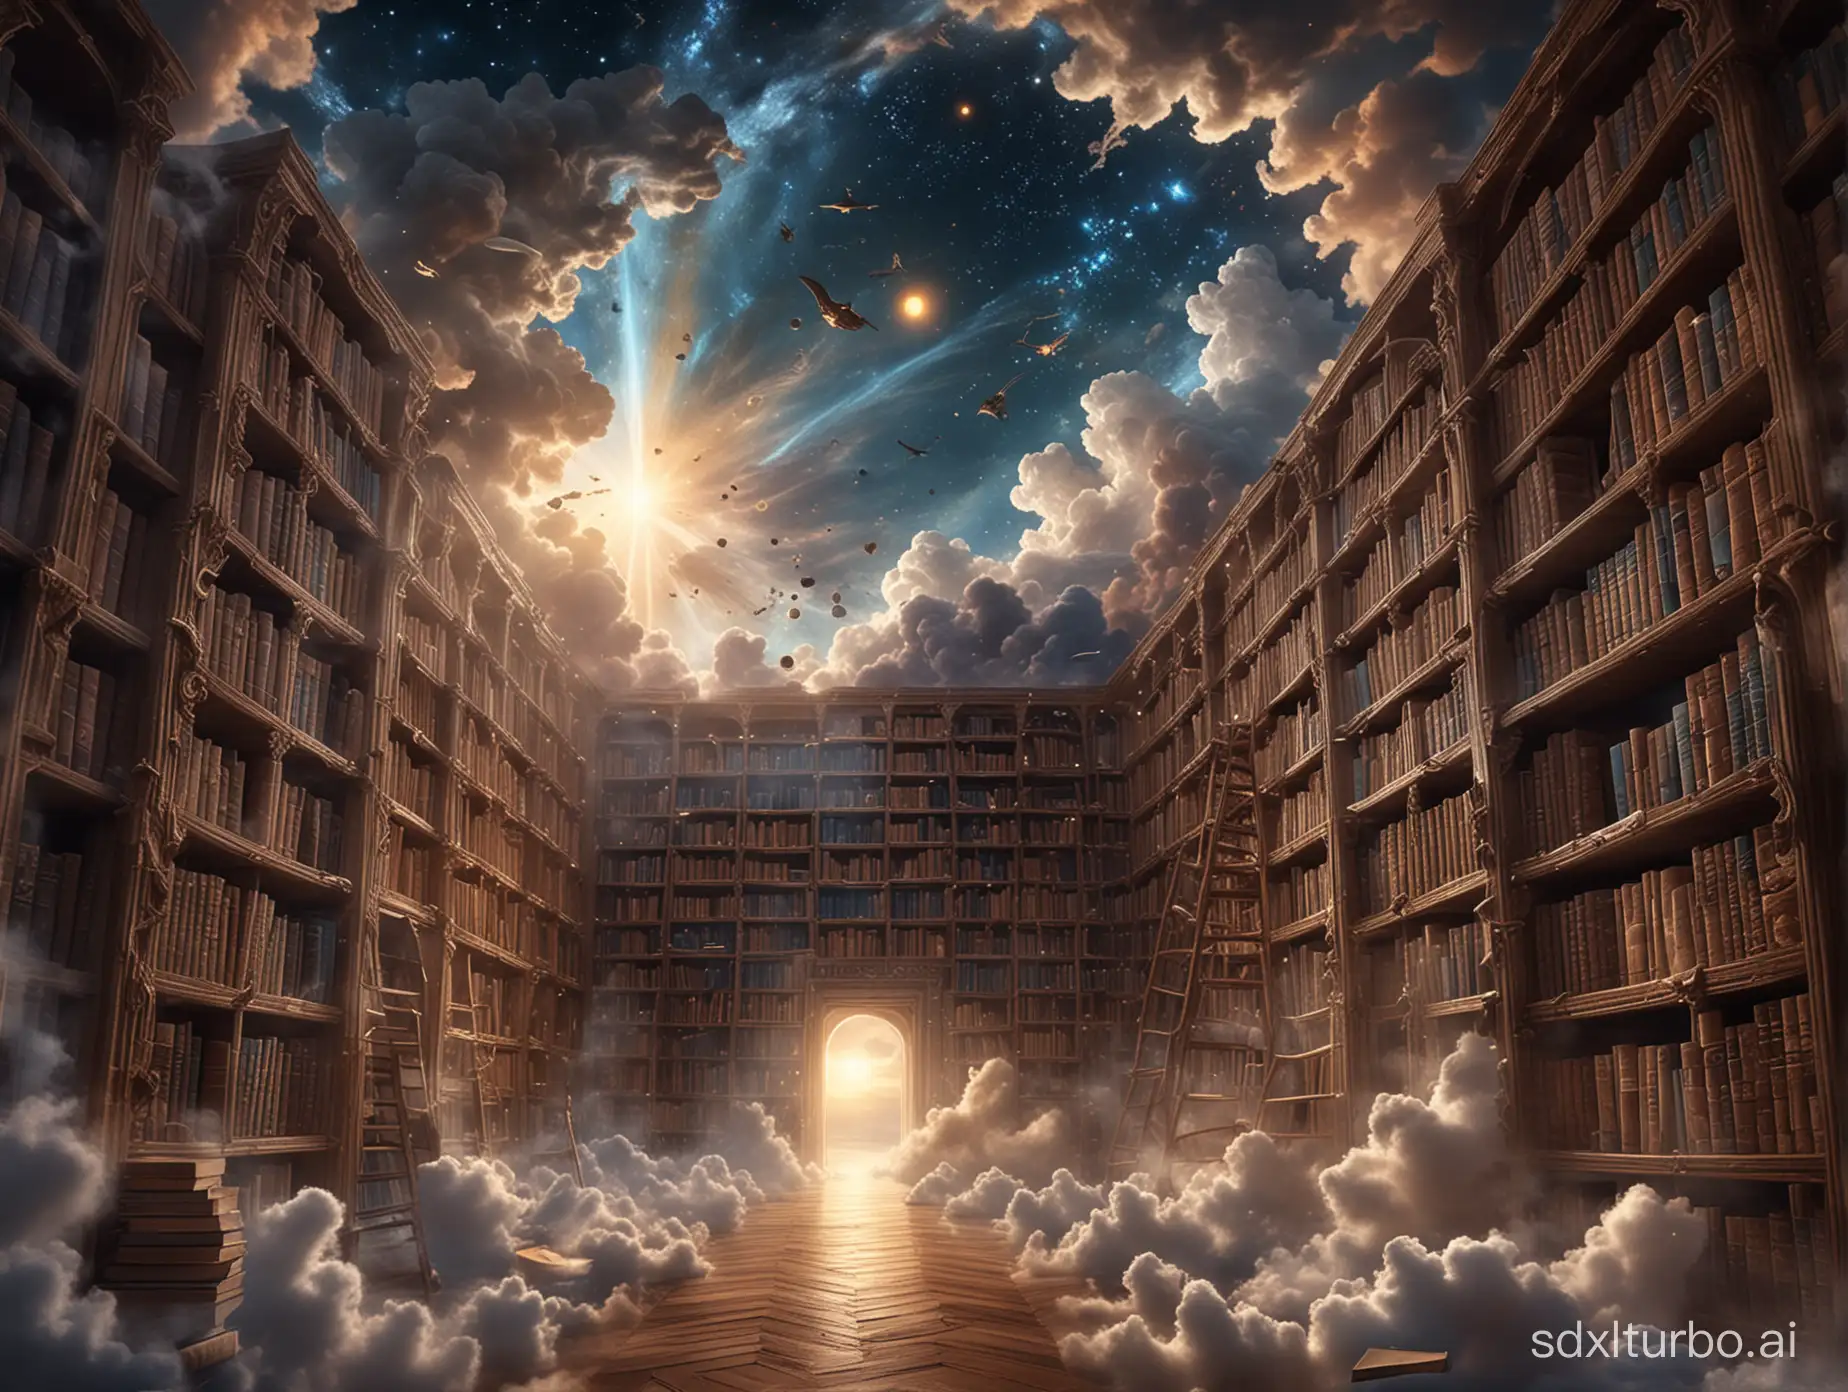 Celestial-Cloud-Library-with-Endless-Bookshelves-and-Wise-Guardians